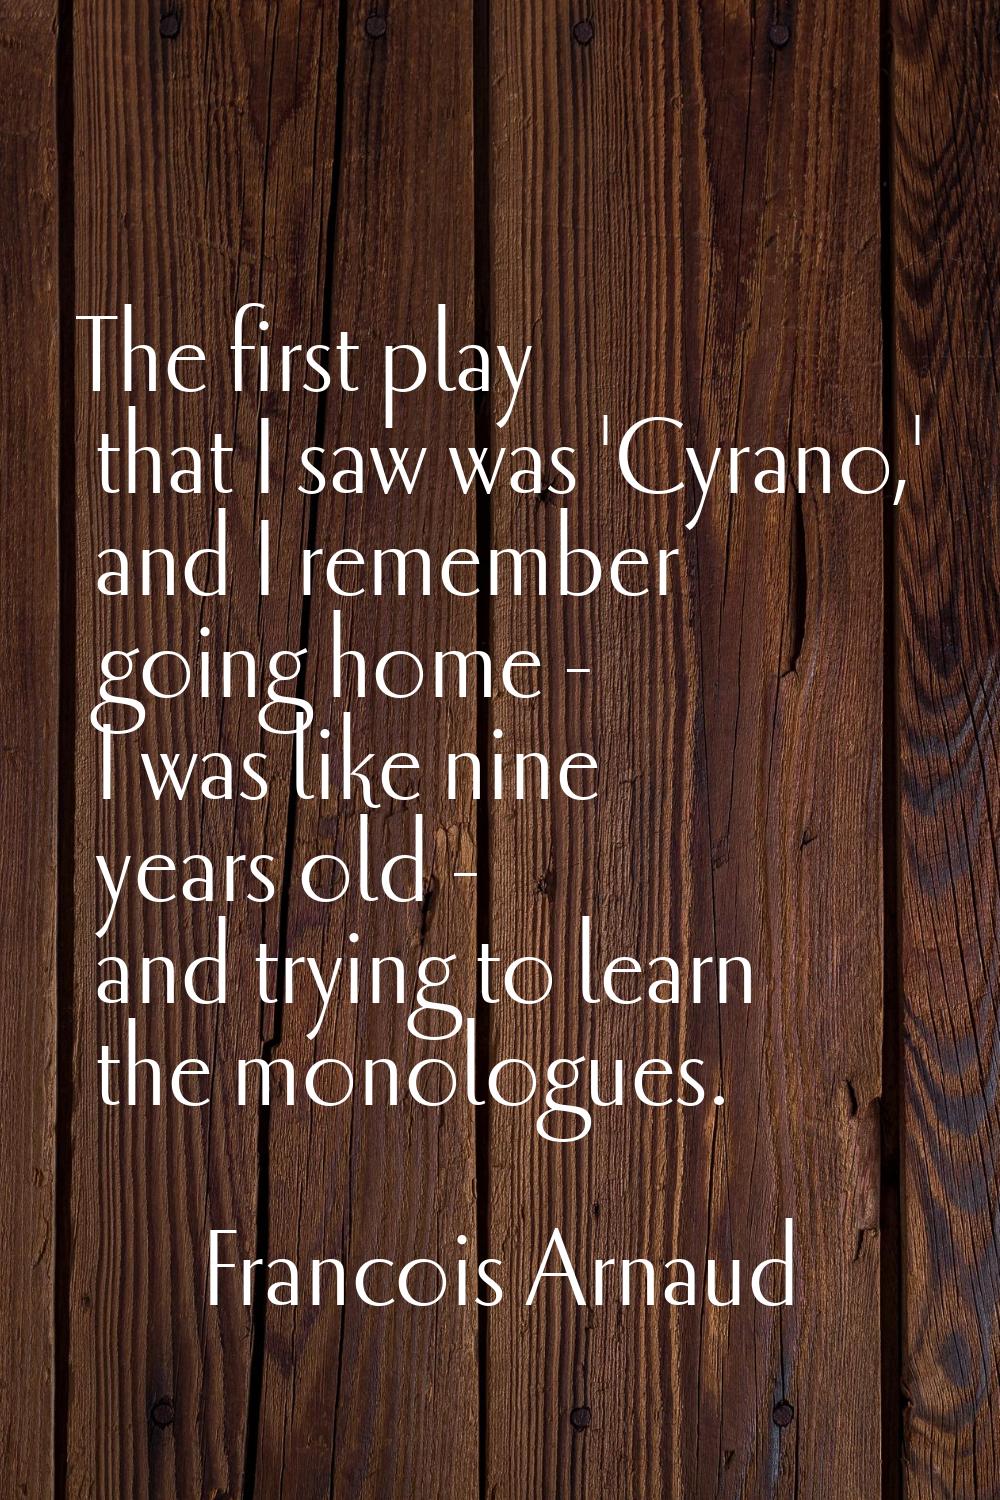 The first play that I saw was 'Cyrano,' and I remember going home - I was like nine years old - and